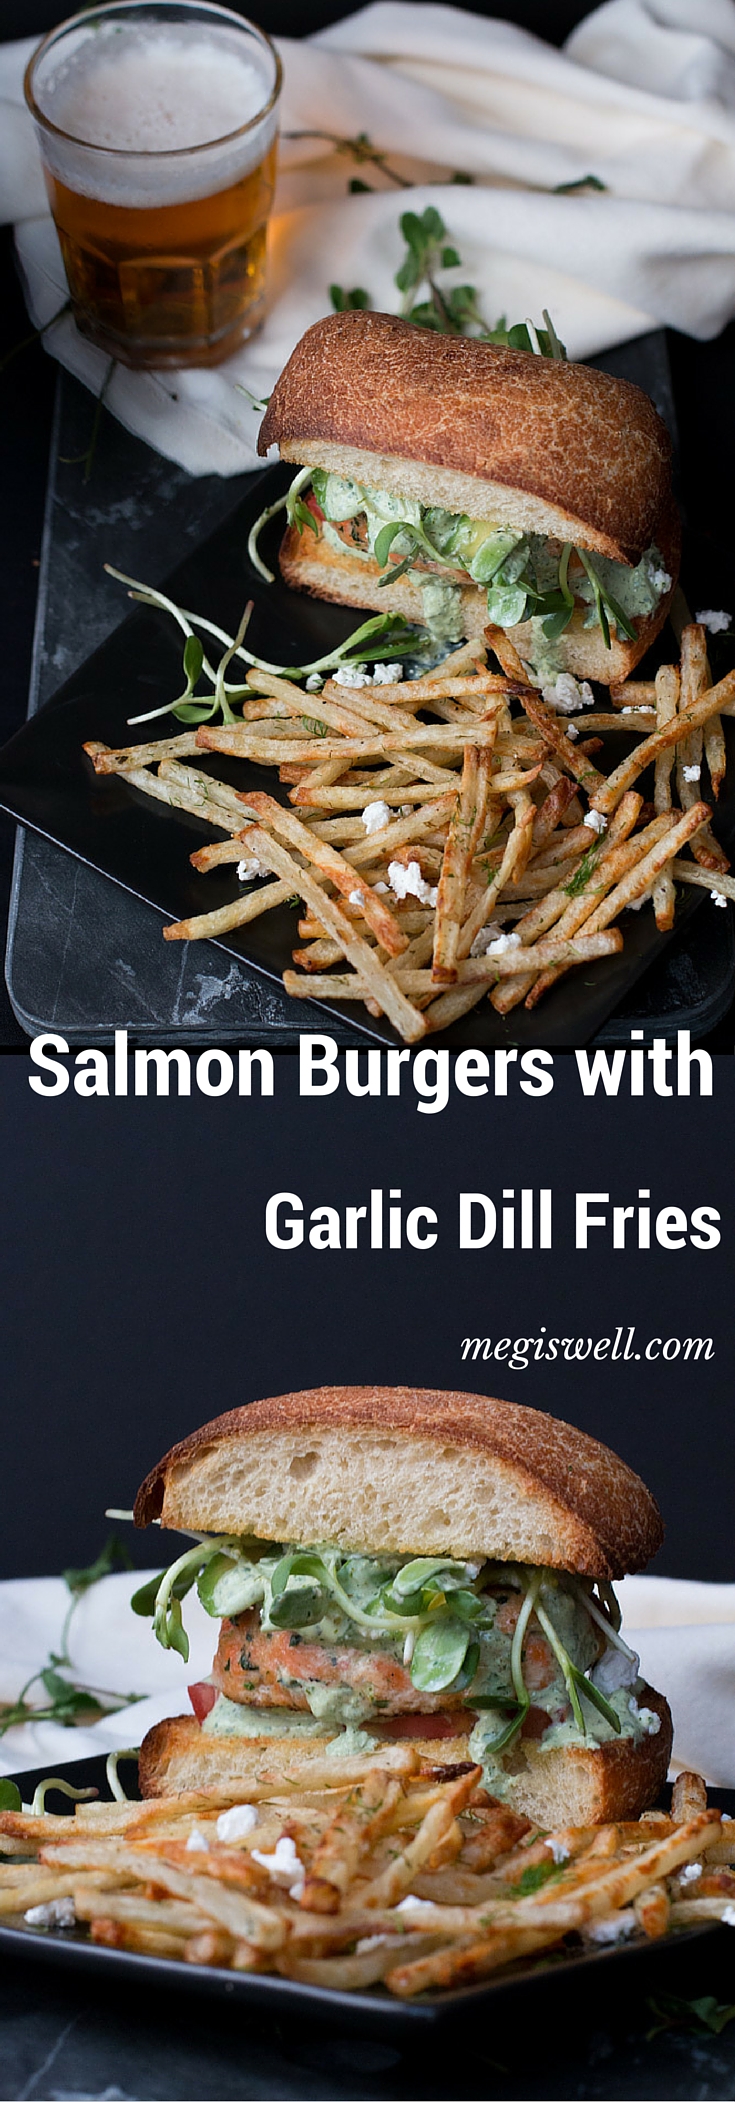 Salmon Burgers with Garlic Dill Fries. Mint, basil, and dill tie juicy Salmon Burgers and crisp Garlic Dill Fries together with their fresh bright flavors. Served with a Mixed Herb Greek Yogurt Dip and crumbled feta, you have a complete meal full of awesome flavor.